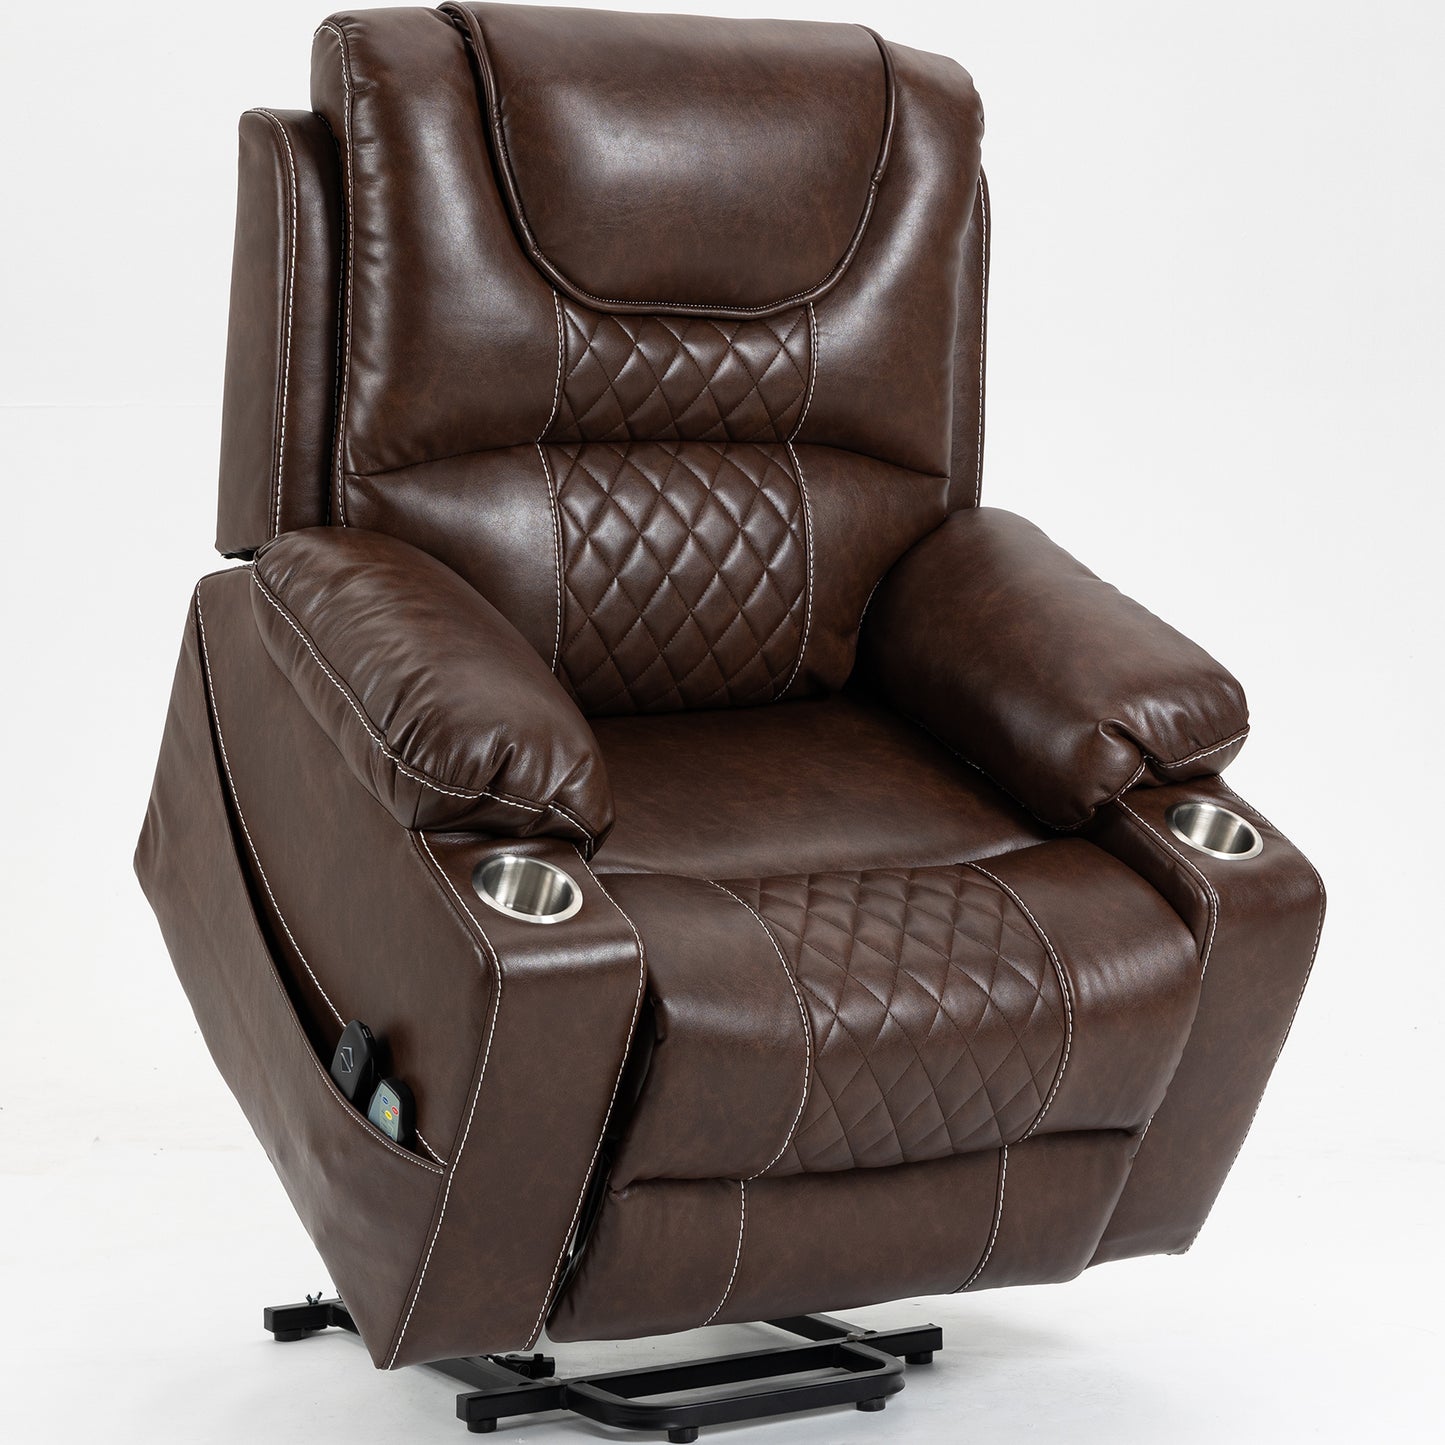 Large Power Lift Recliner Chair for Living Room, Oversized Leather Electric Lounge Chair Single Sofa with Cup Holders, USB Port and Side Pockets, Recliner for Elderly Adults Big Man, Brown